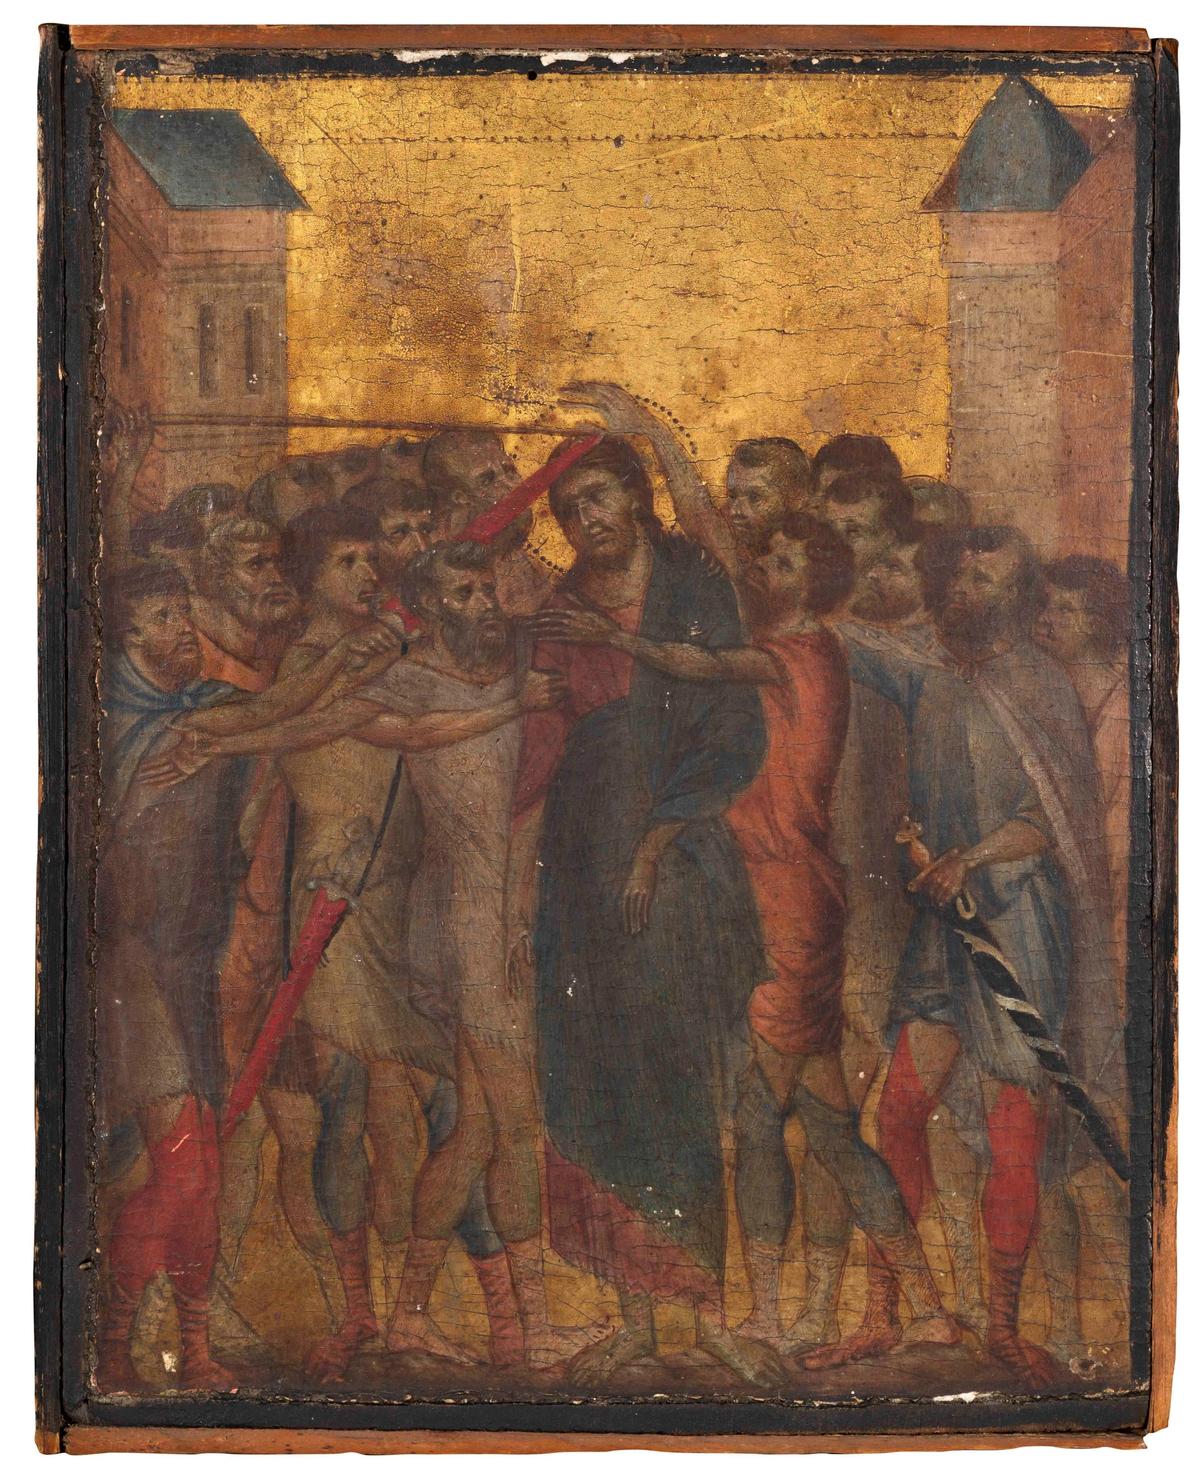 The work is expected to be displayed alongside Maestà (around 1275-1300), another work by Cimabue at the Louvre 